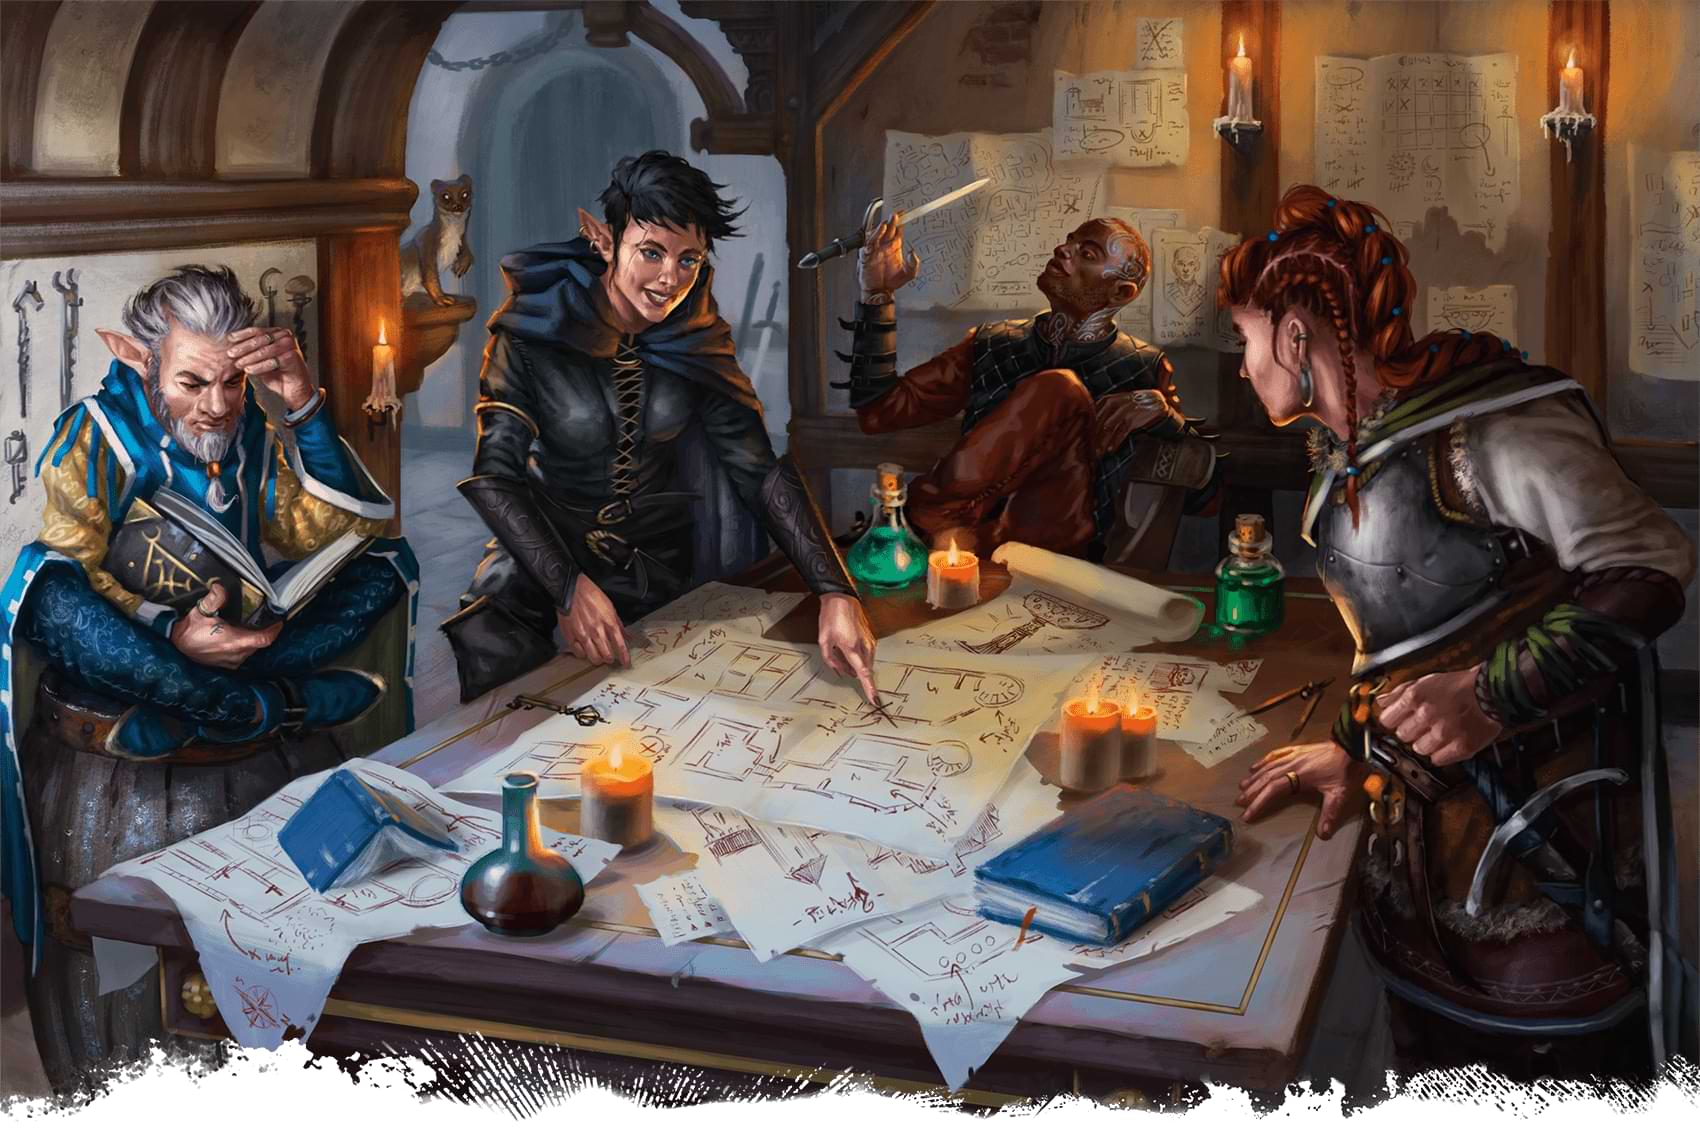 An adventuring party plans a heist around a table with blueprints